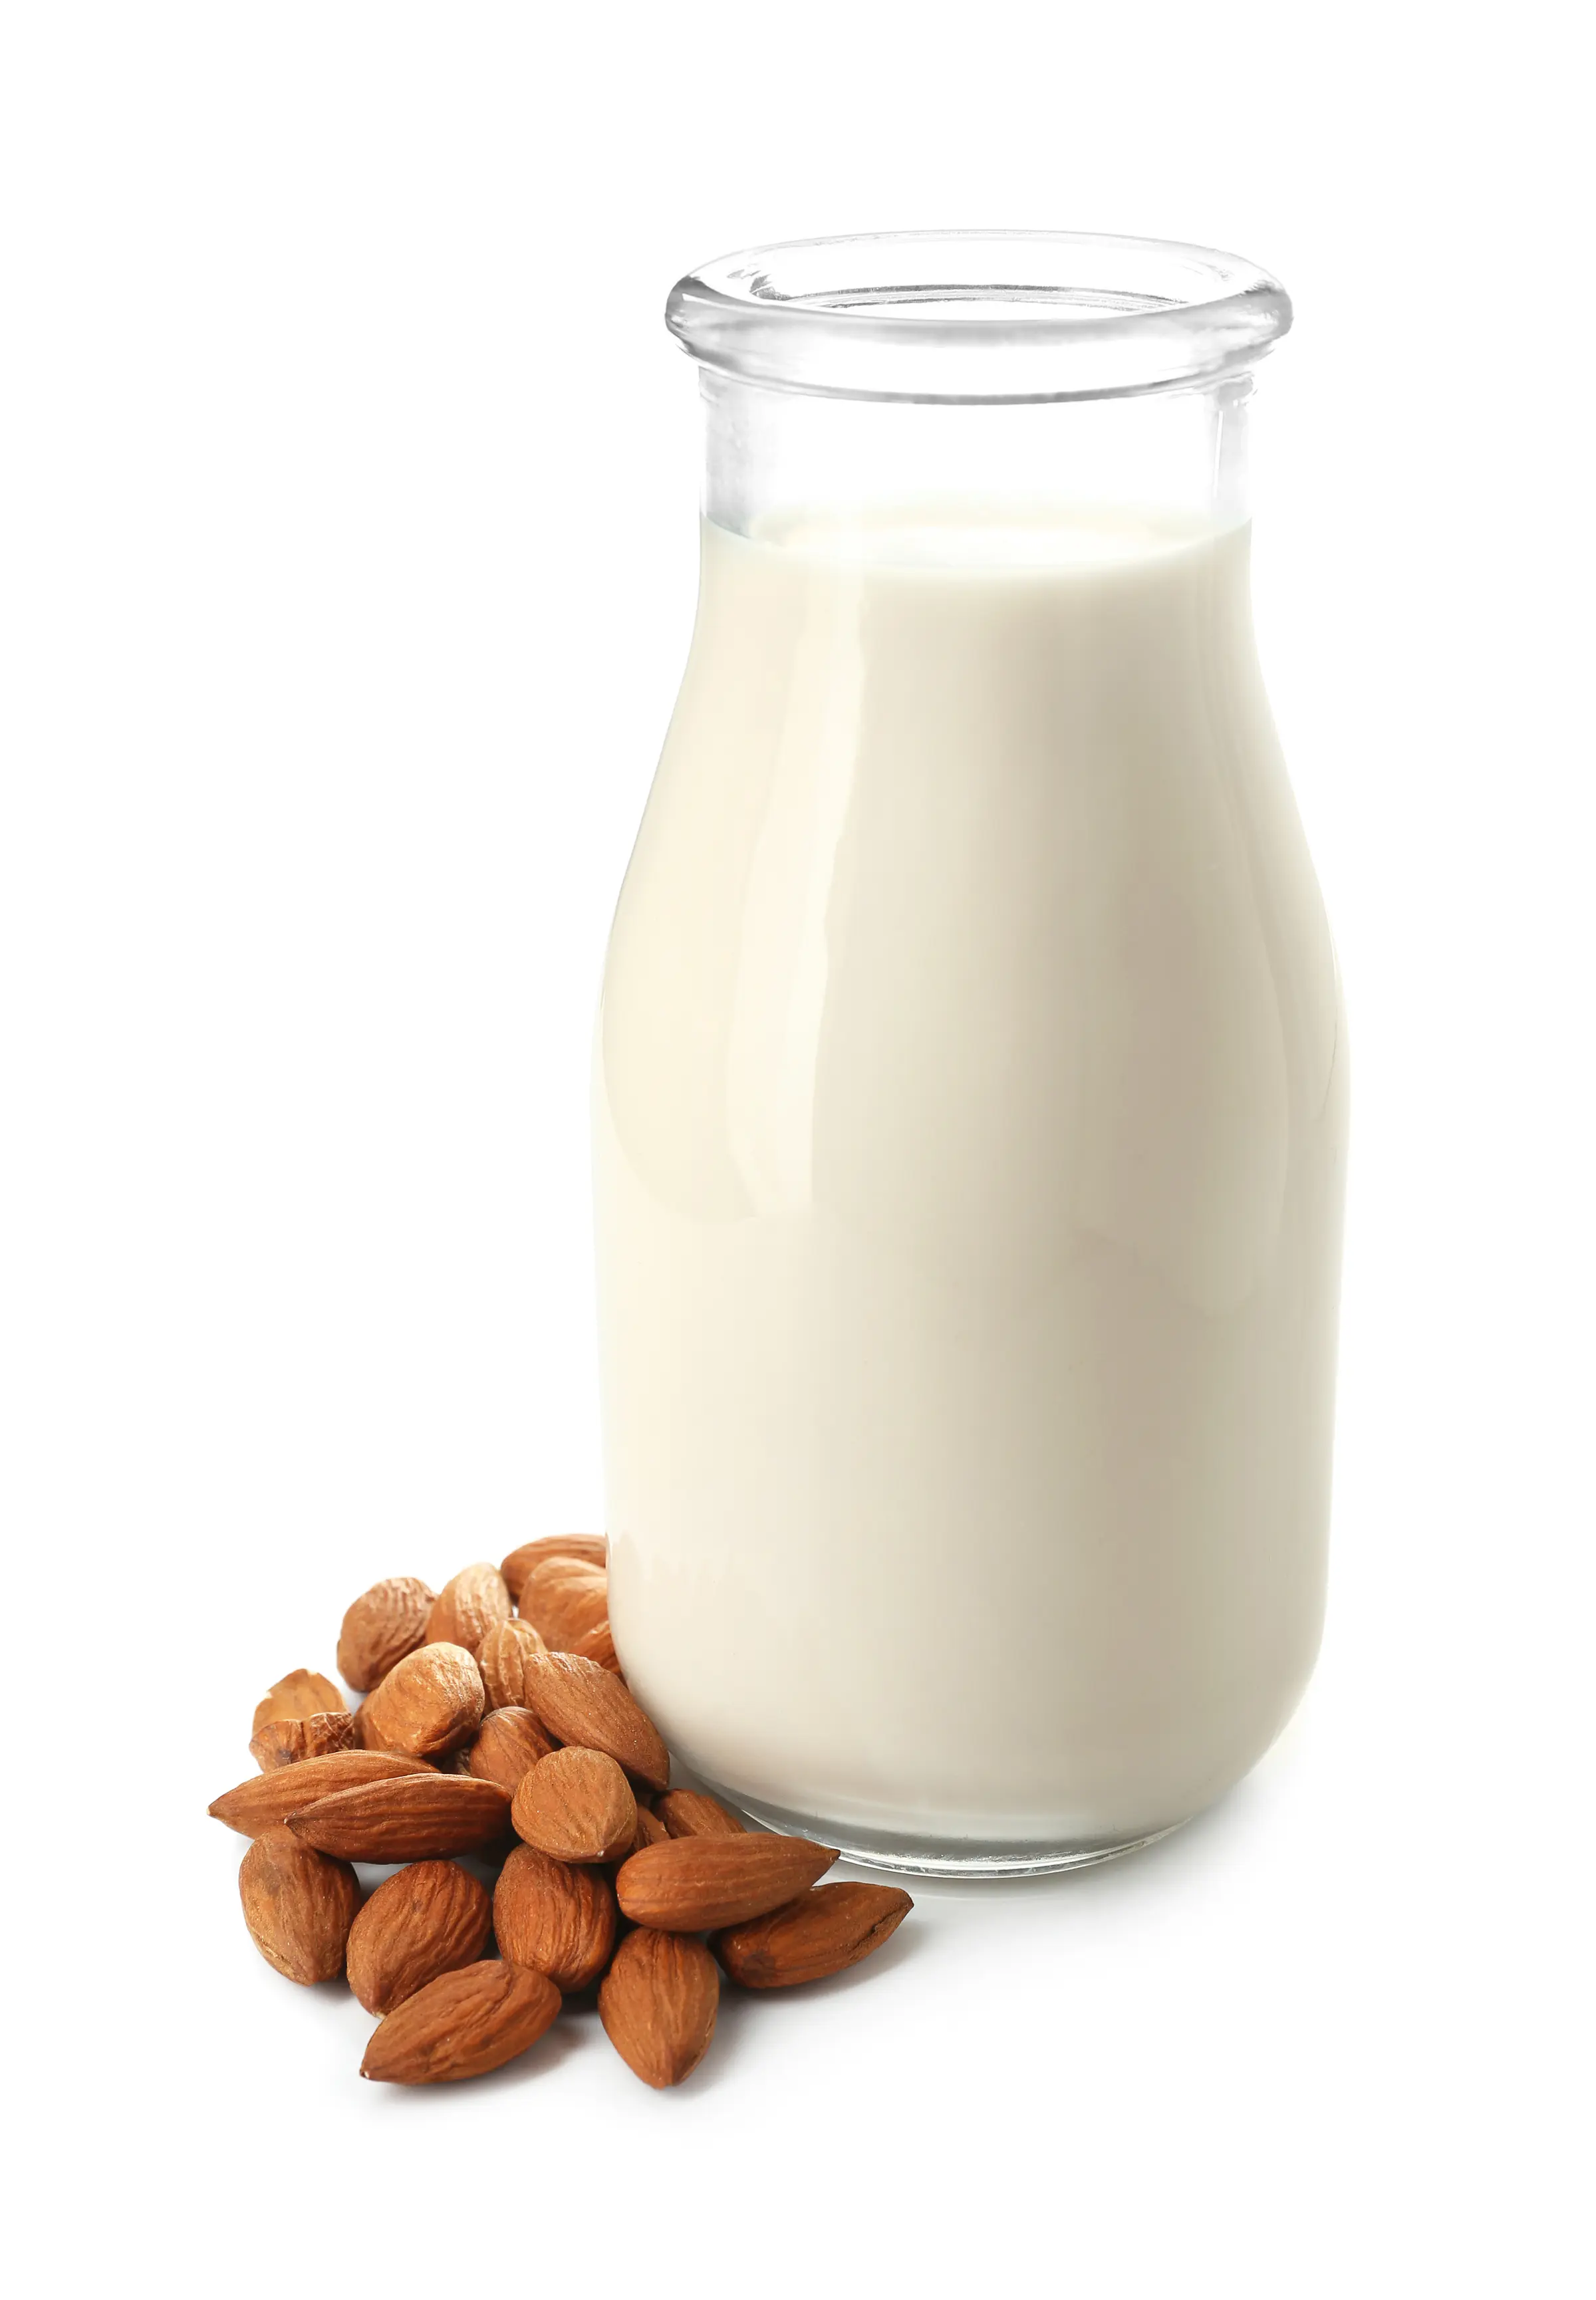 A tall glass bottle of almond milk, with a small pile of almonds beside it.